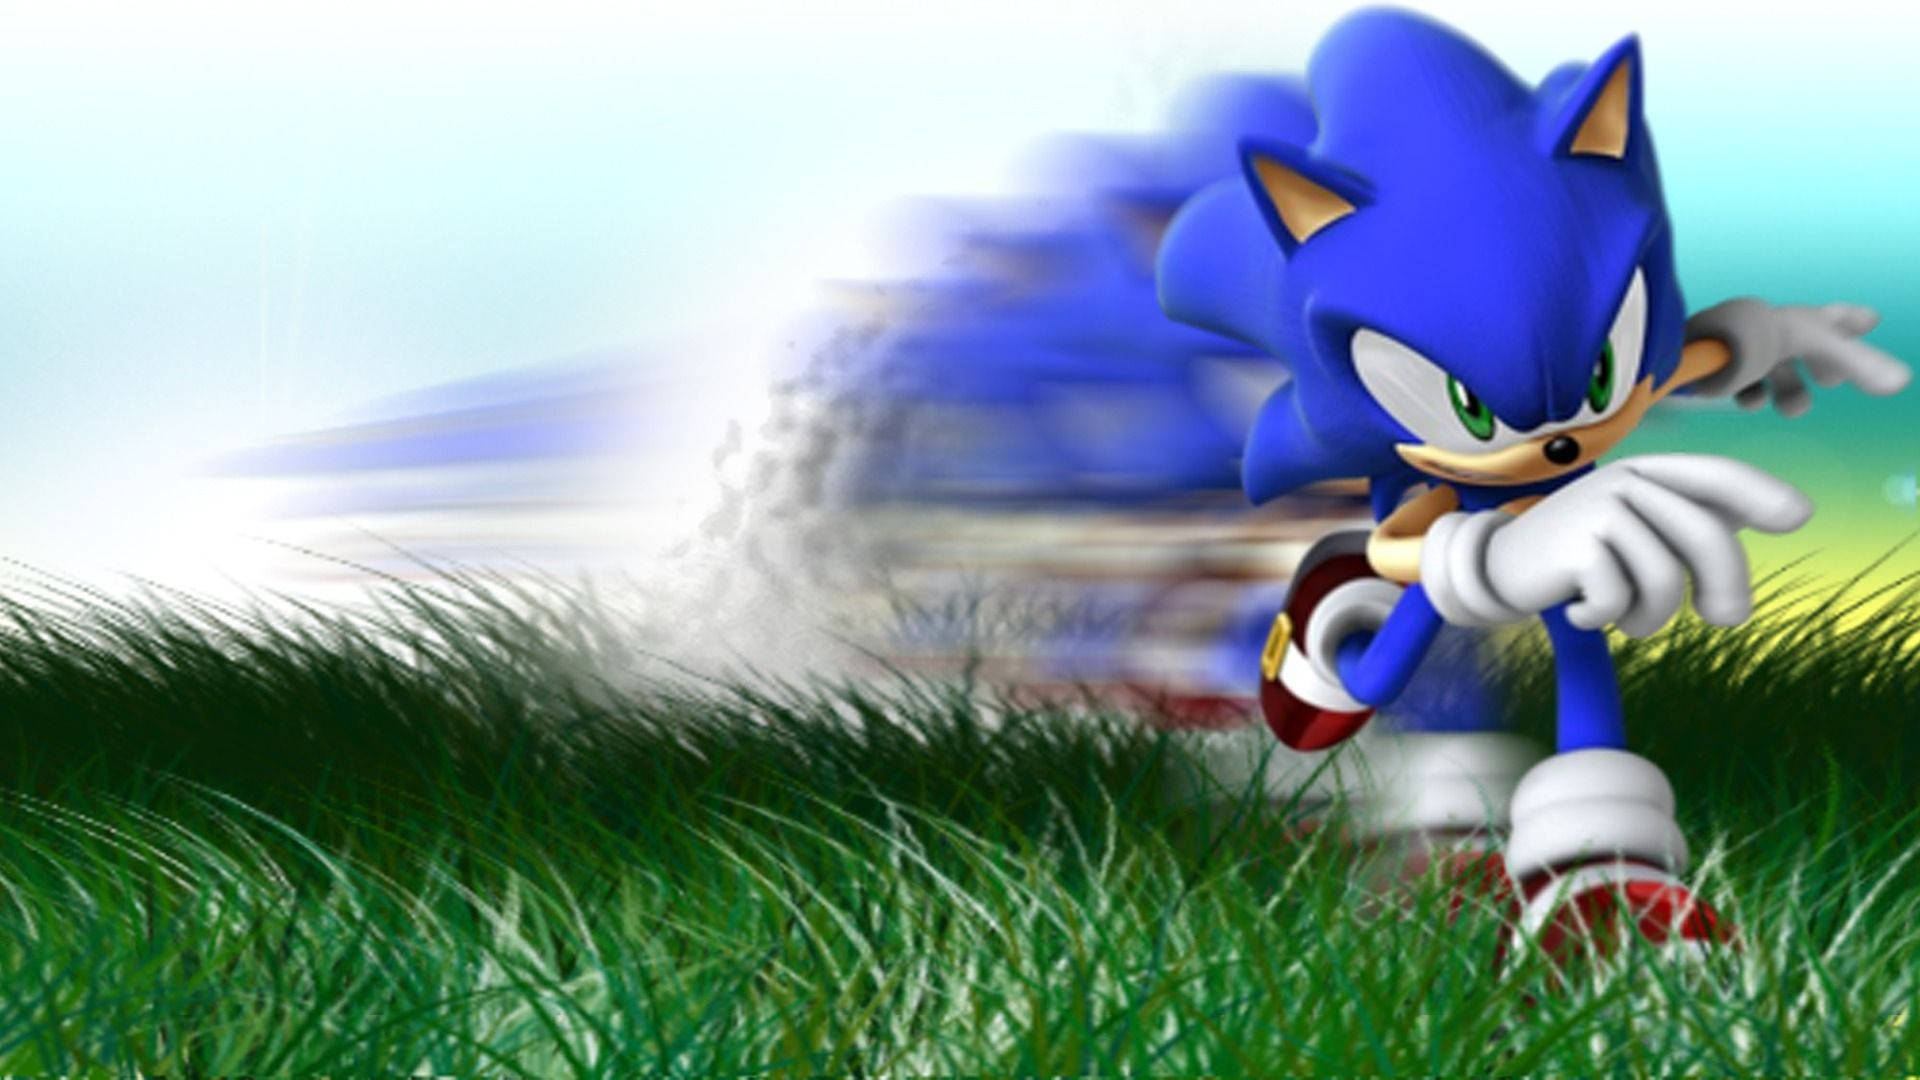 Sonic the Hedgehog is ready for action Wallpaper